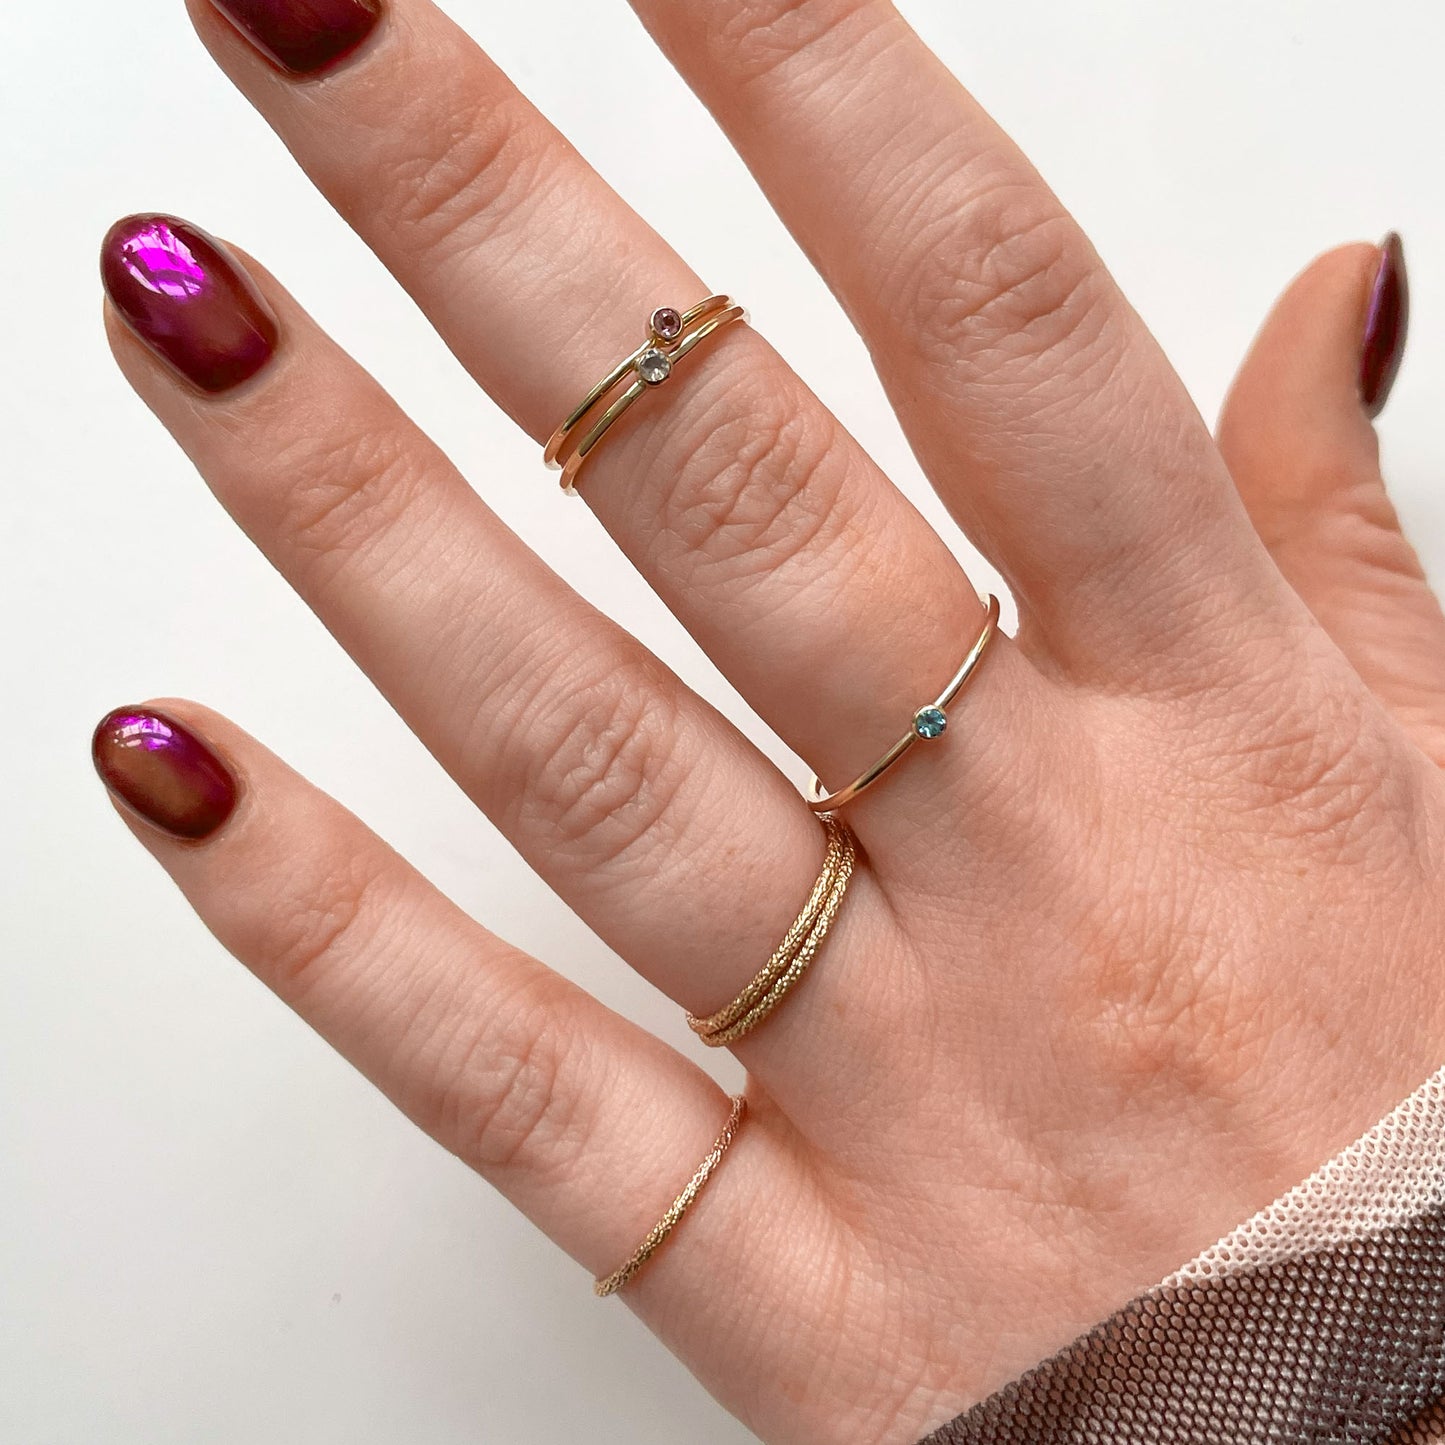 Sparkle stacking ring gold filled